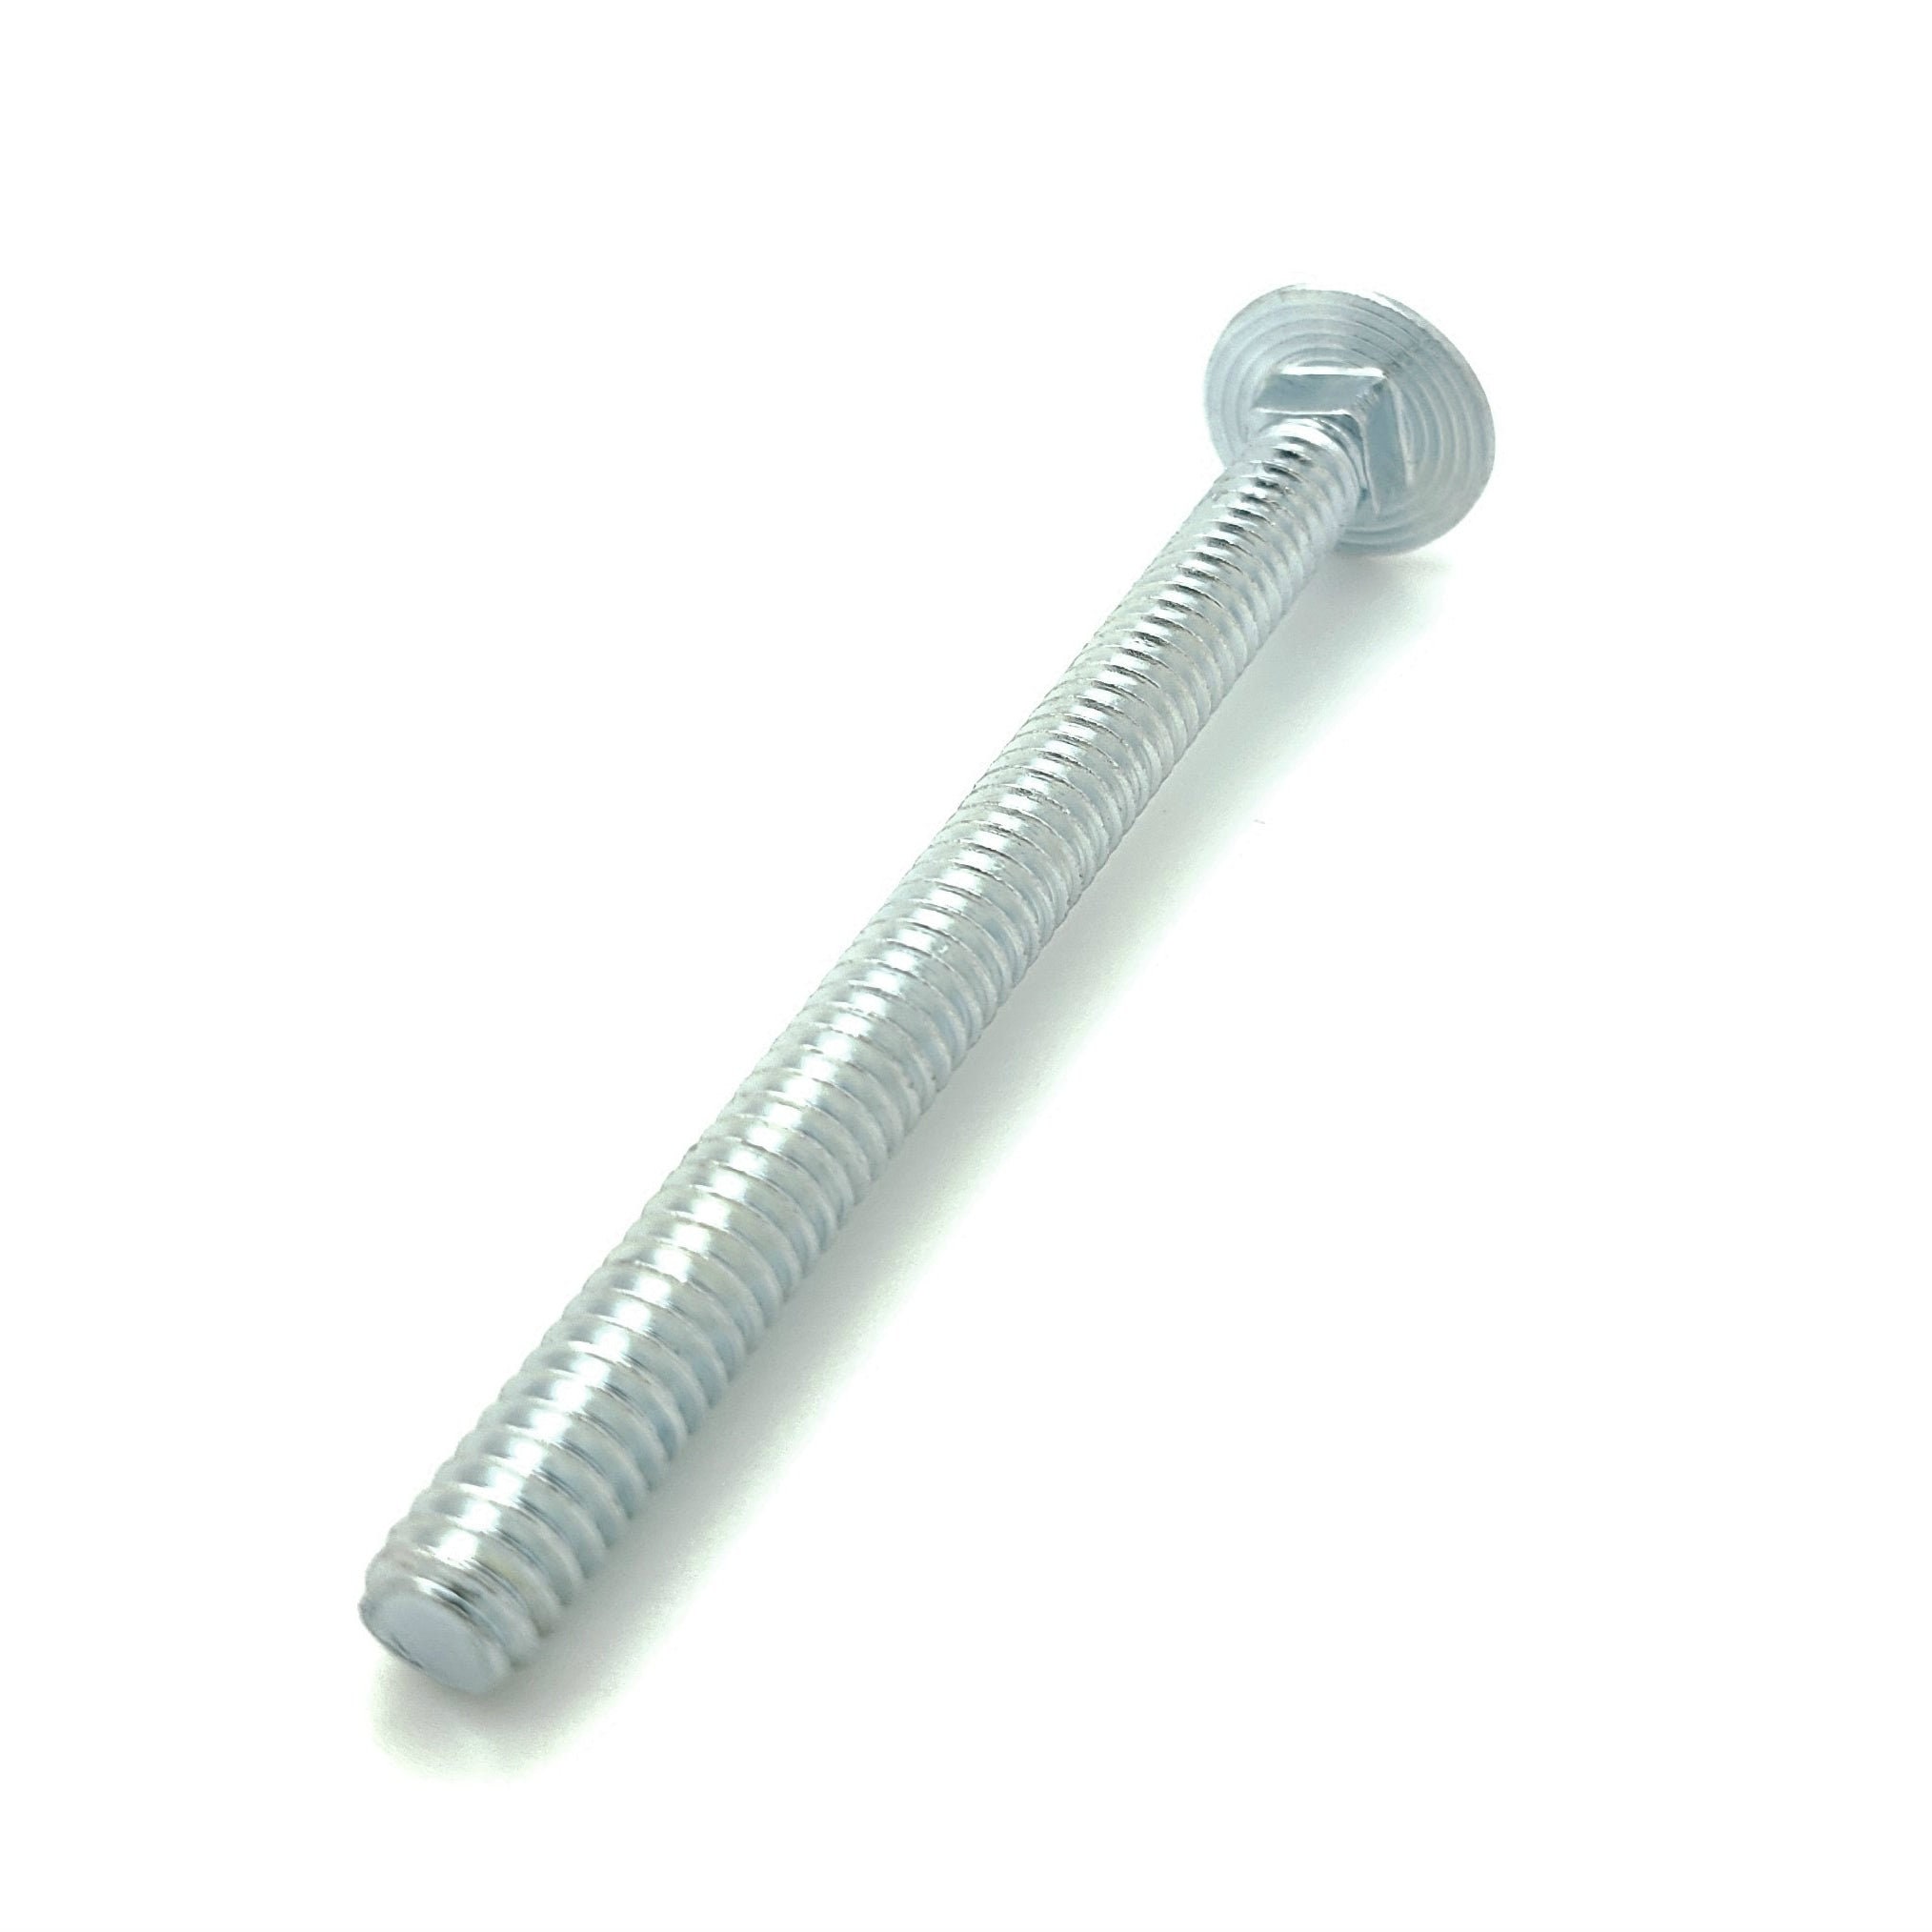 Ten 10 5/16-18 X Long Carriage Bolts Set W/ Nuts  Etsy